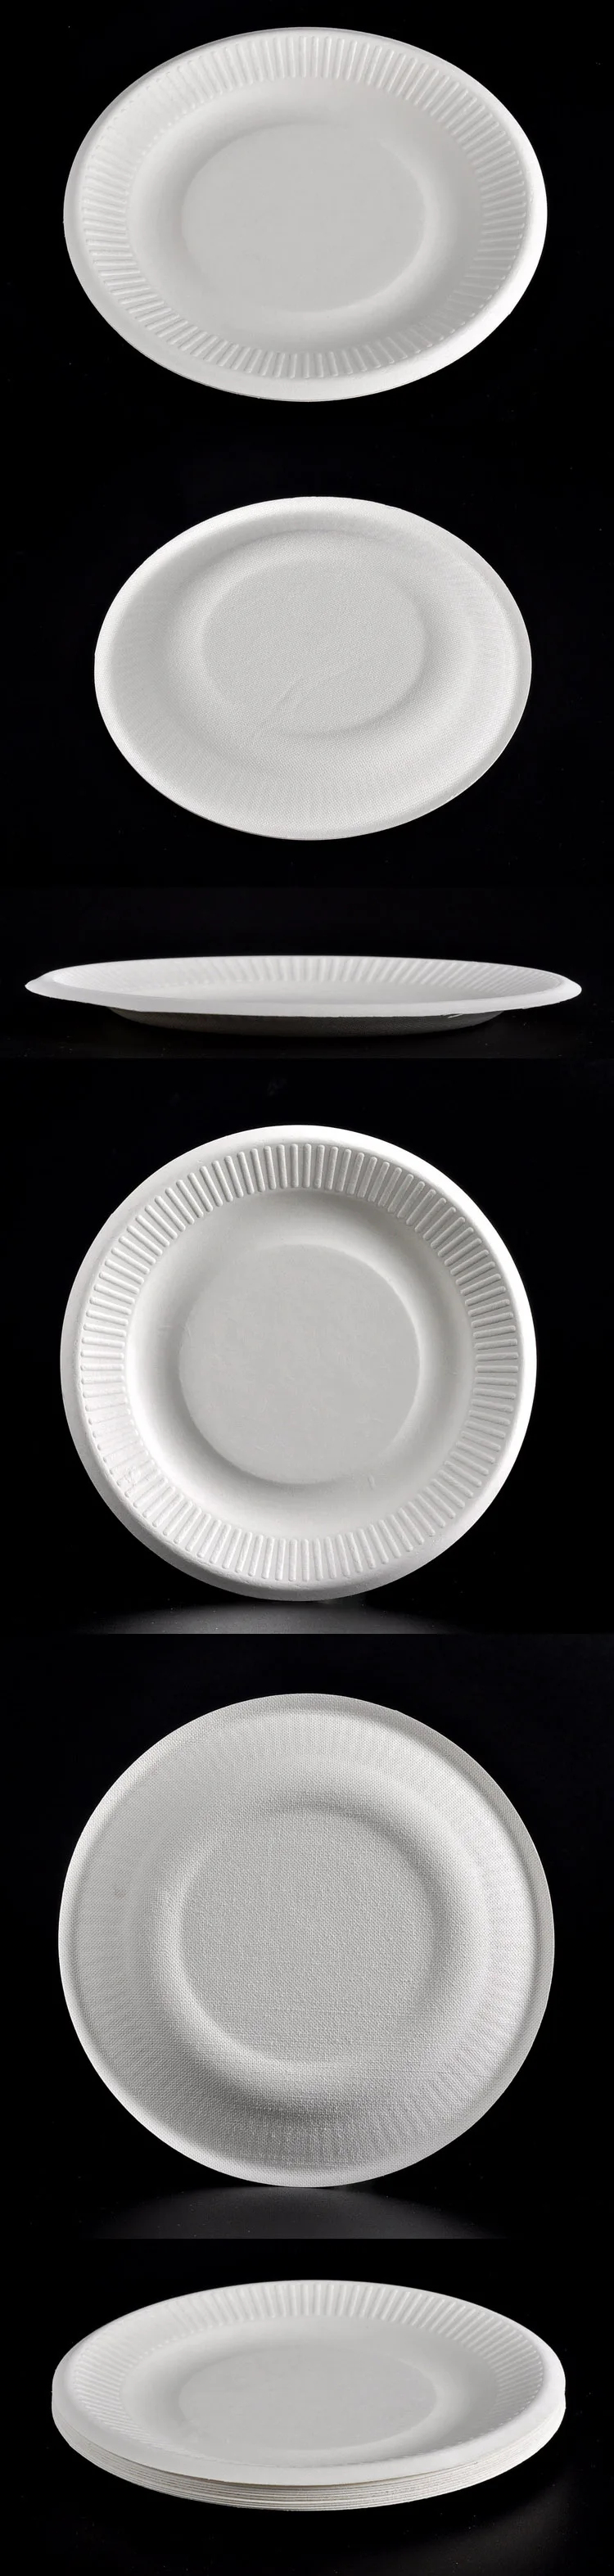 Renewable and reclaimed resources biodegradable Sugarcane Pulp round plate tableware